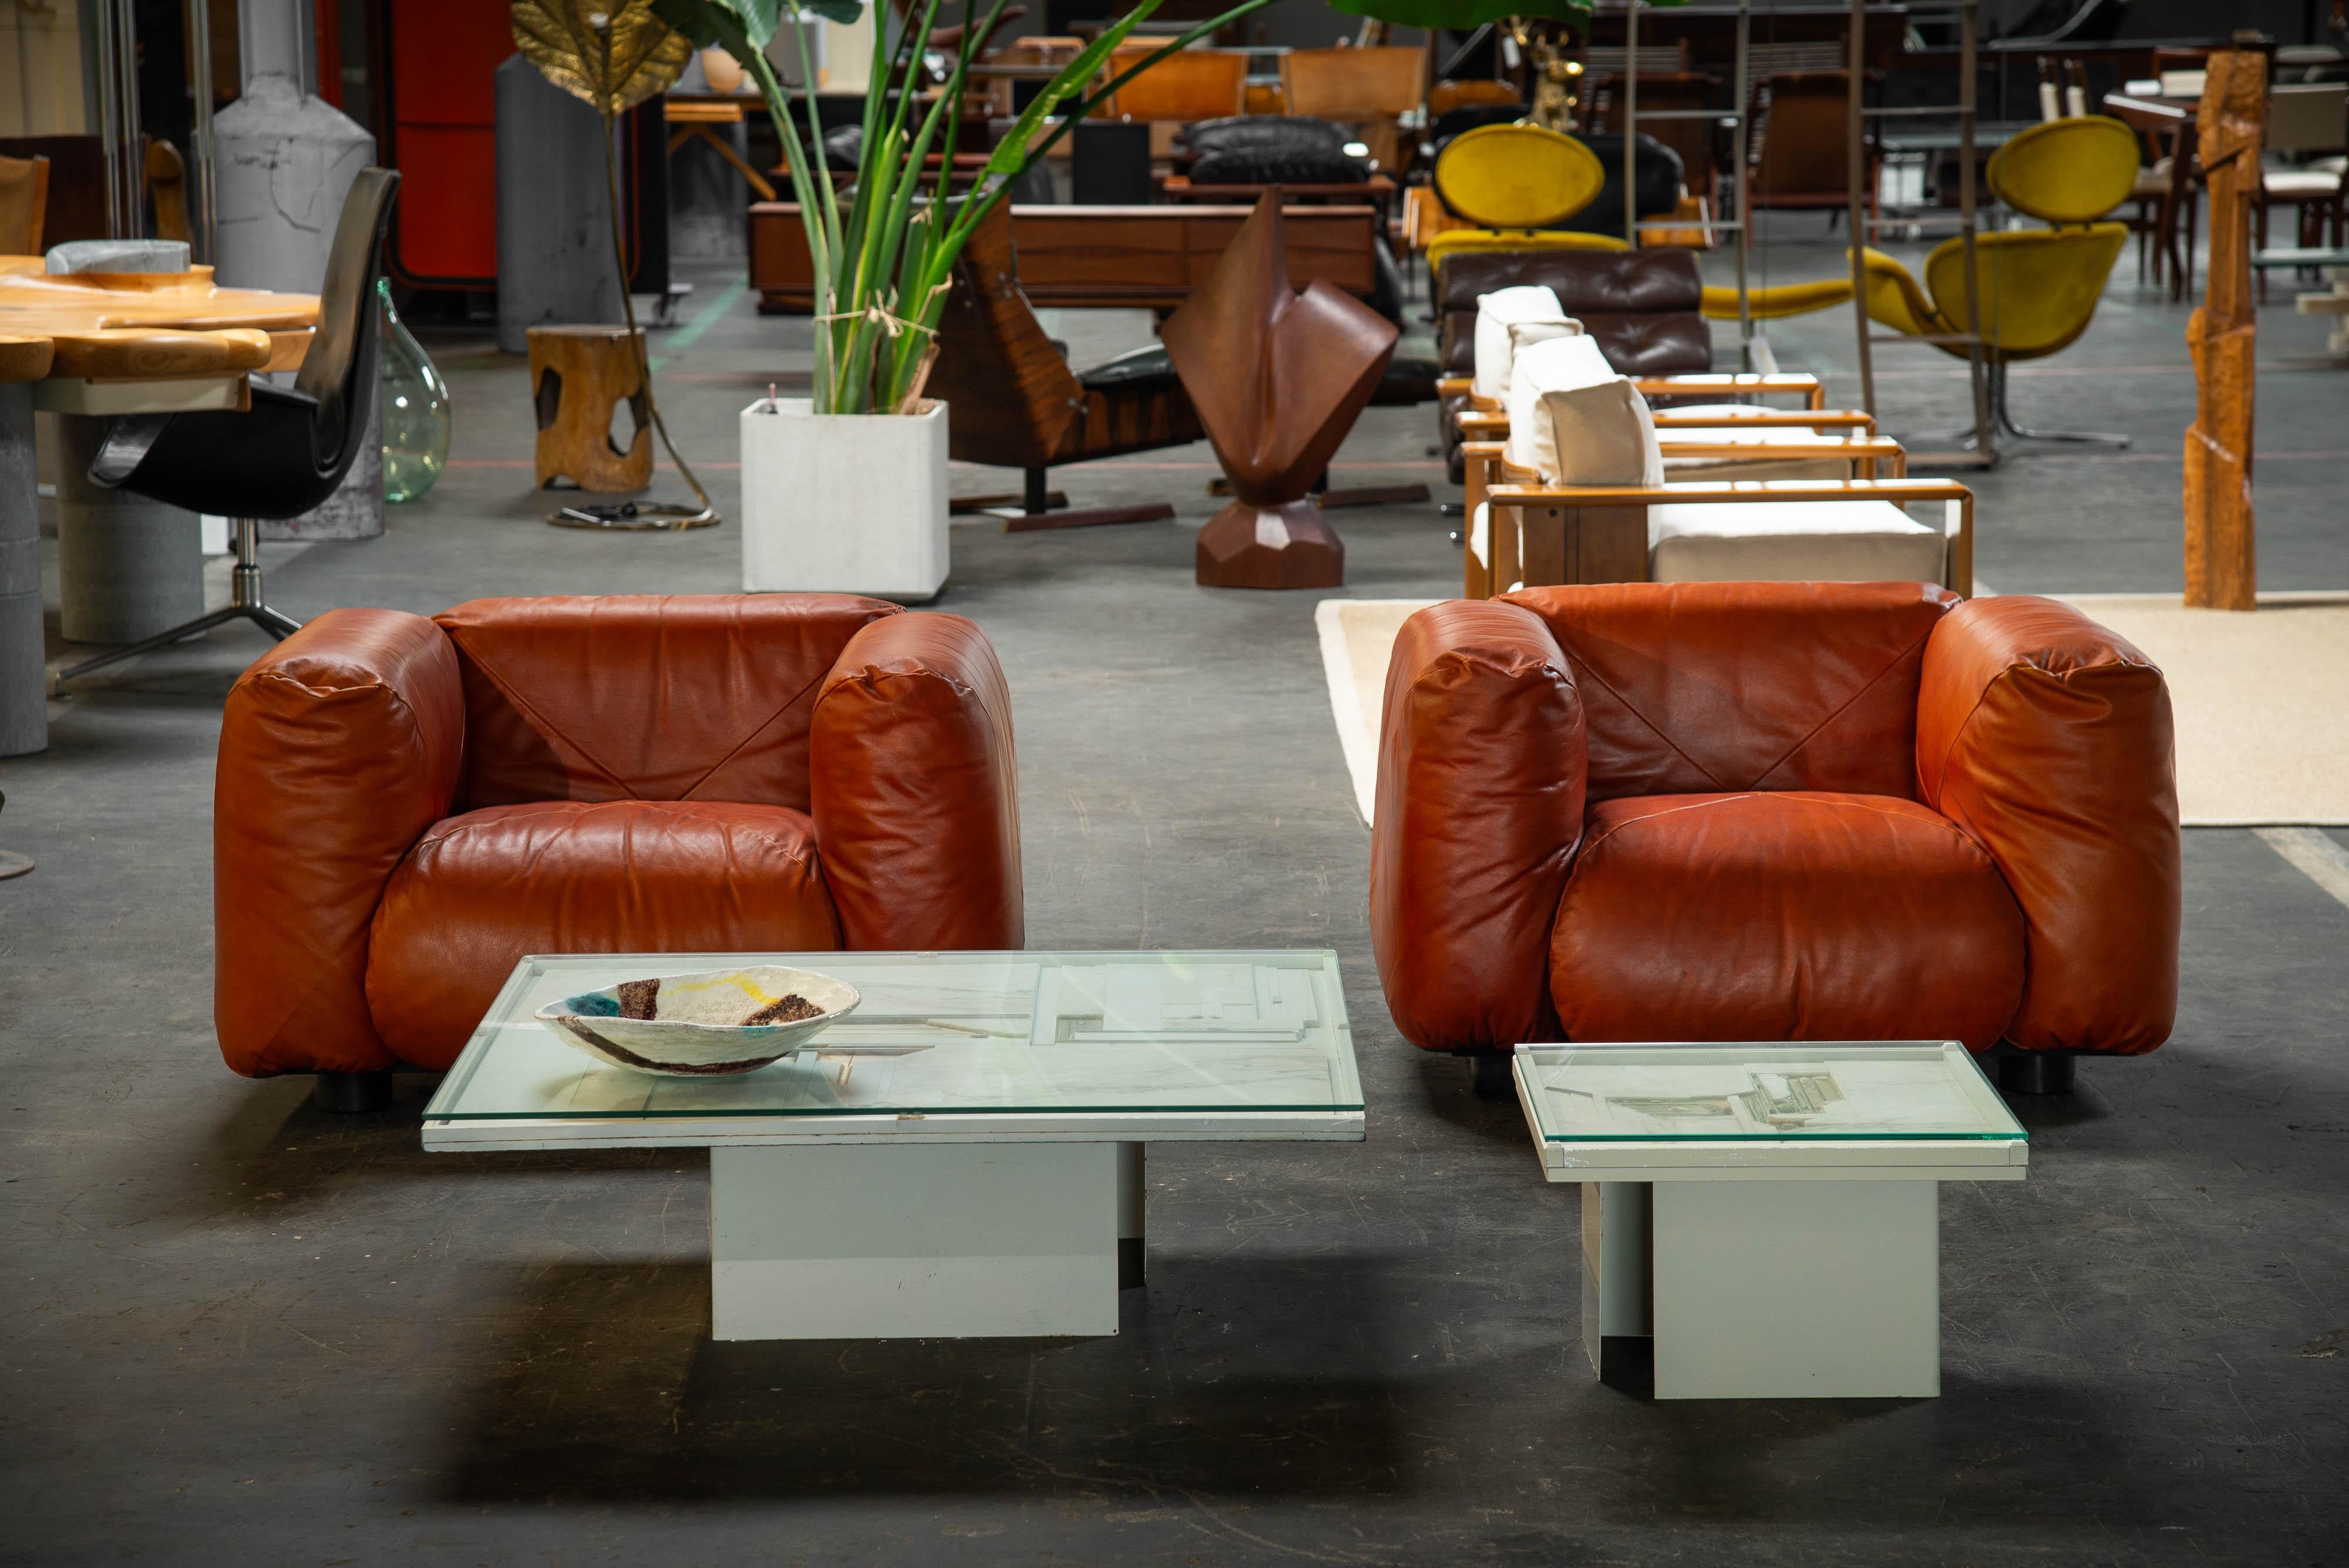 Cool pair of Marius & Marius Lounge Chairs, designed by Mario Marenco and manufactured by Arflex in Italy in 1970. These chairs are true classics, featuring four extremely comfortable foam-filled cushions covered in beautiful leather. These cushions